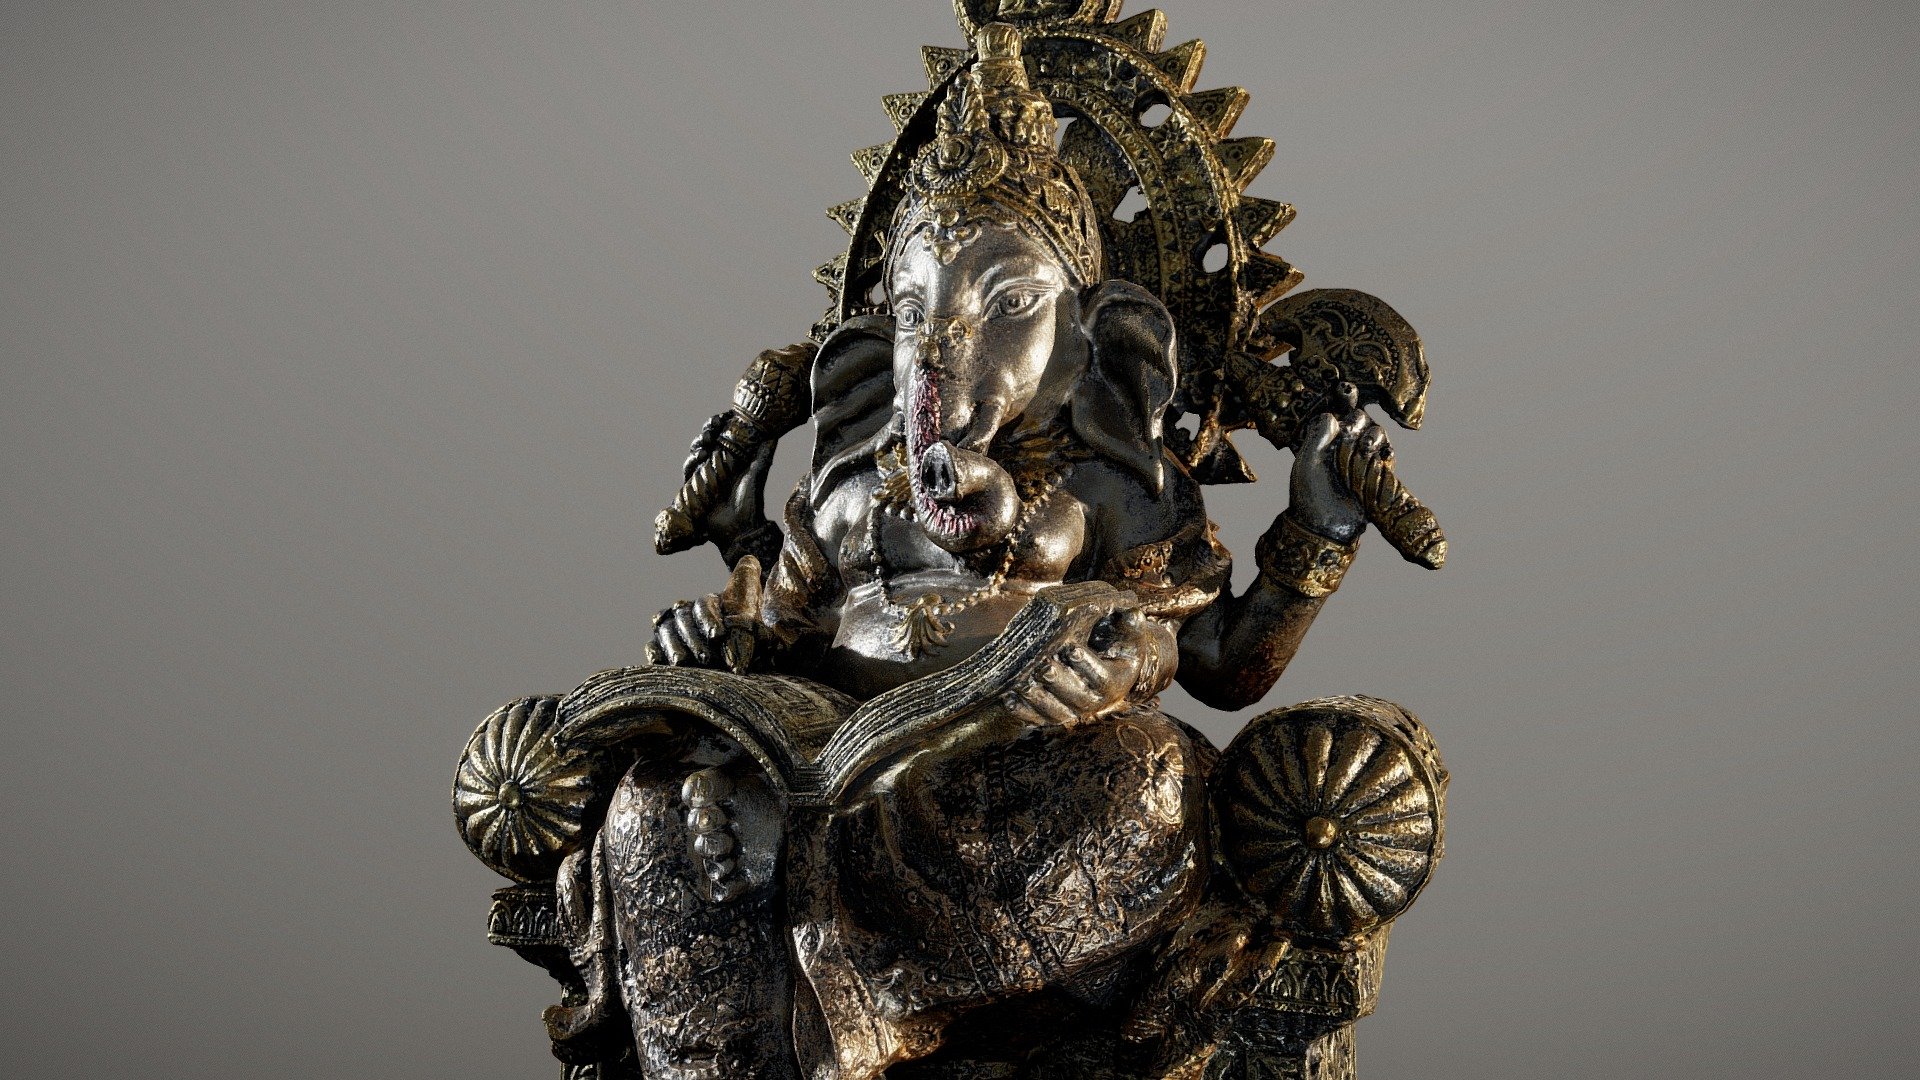 ** Antique Ganesha Statue **

Ganesha is known as Elephant God in Hindu pantheon. A god of wealth, symbol of wisdom, success and good fortune.

12.9 x 10.0 x 21.4 cm (45 micrometers per texel @ 8k)

Scanned using advanced technology developed by inciprocal Inc. that enables highly photo-realistic reproduction of real-world products in virtual environments. Our hardware and software technology combines advanced photometry, structured light, photogrammtery and light fields to capture and generate accurate material representations from tens of thousands of images targeting real-time and offline path-traced PBR compatible renderers.

Zip file includes low-poly OBJ mesh (in meters) with a set of 8k PBR textures compressed with lossless JPEG (no chroma sub-sampling) 3d model